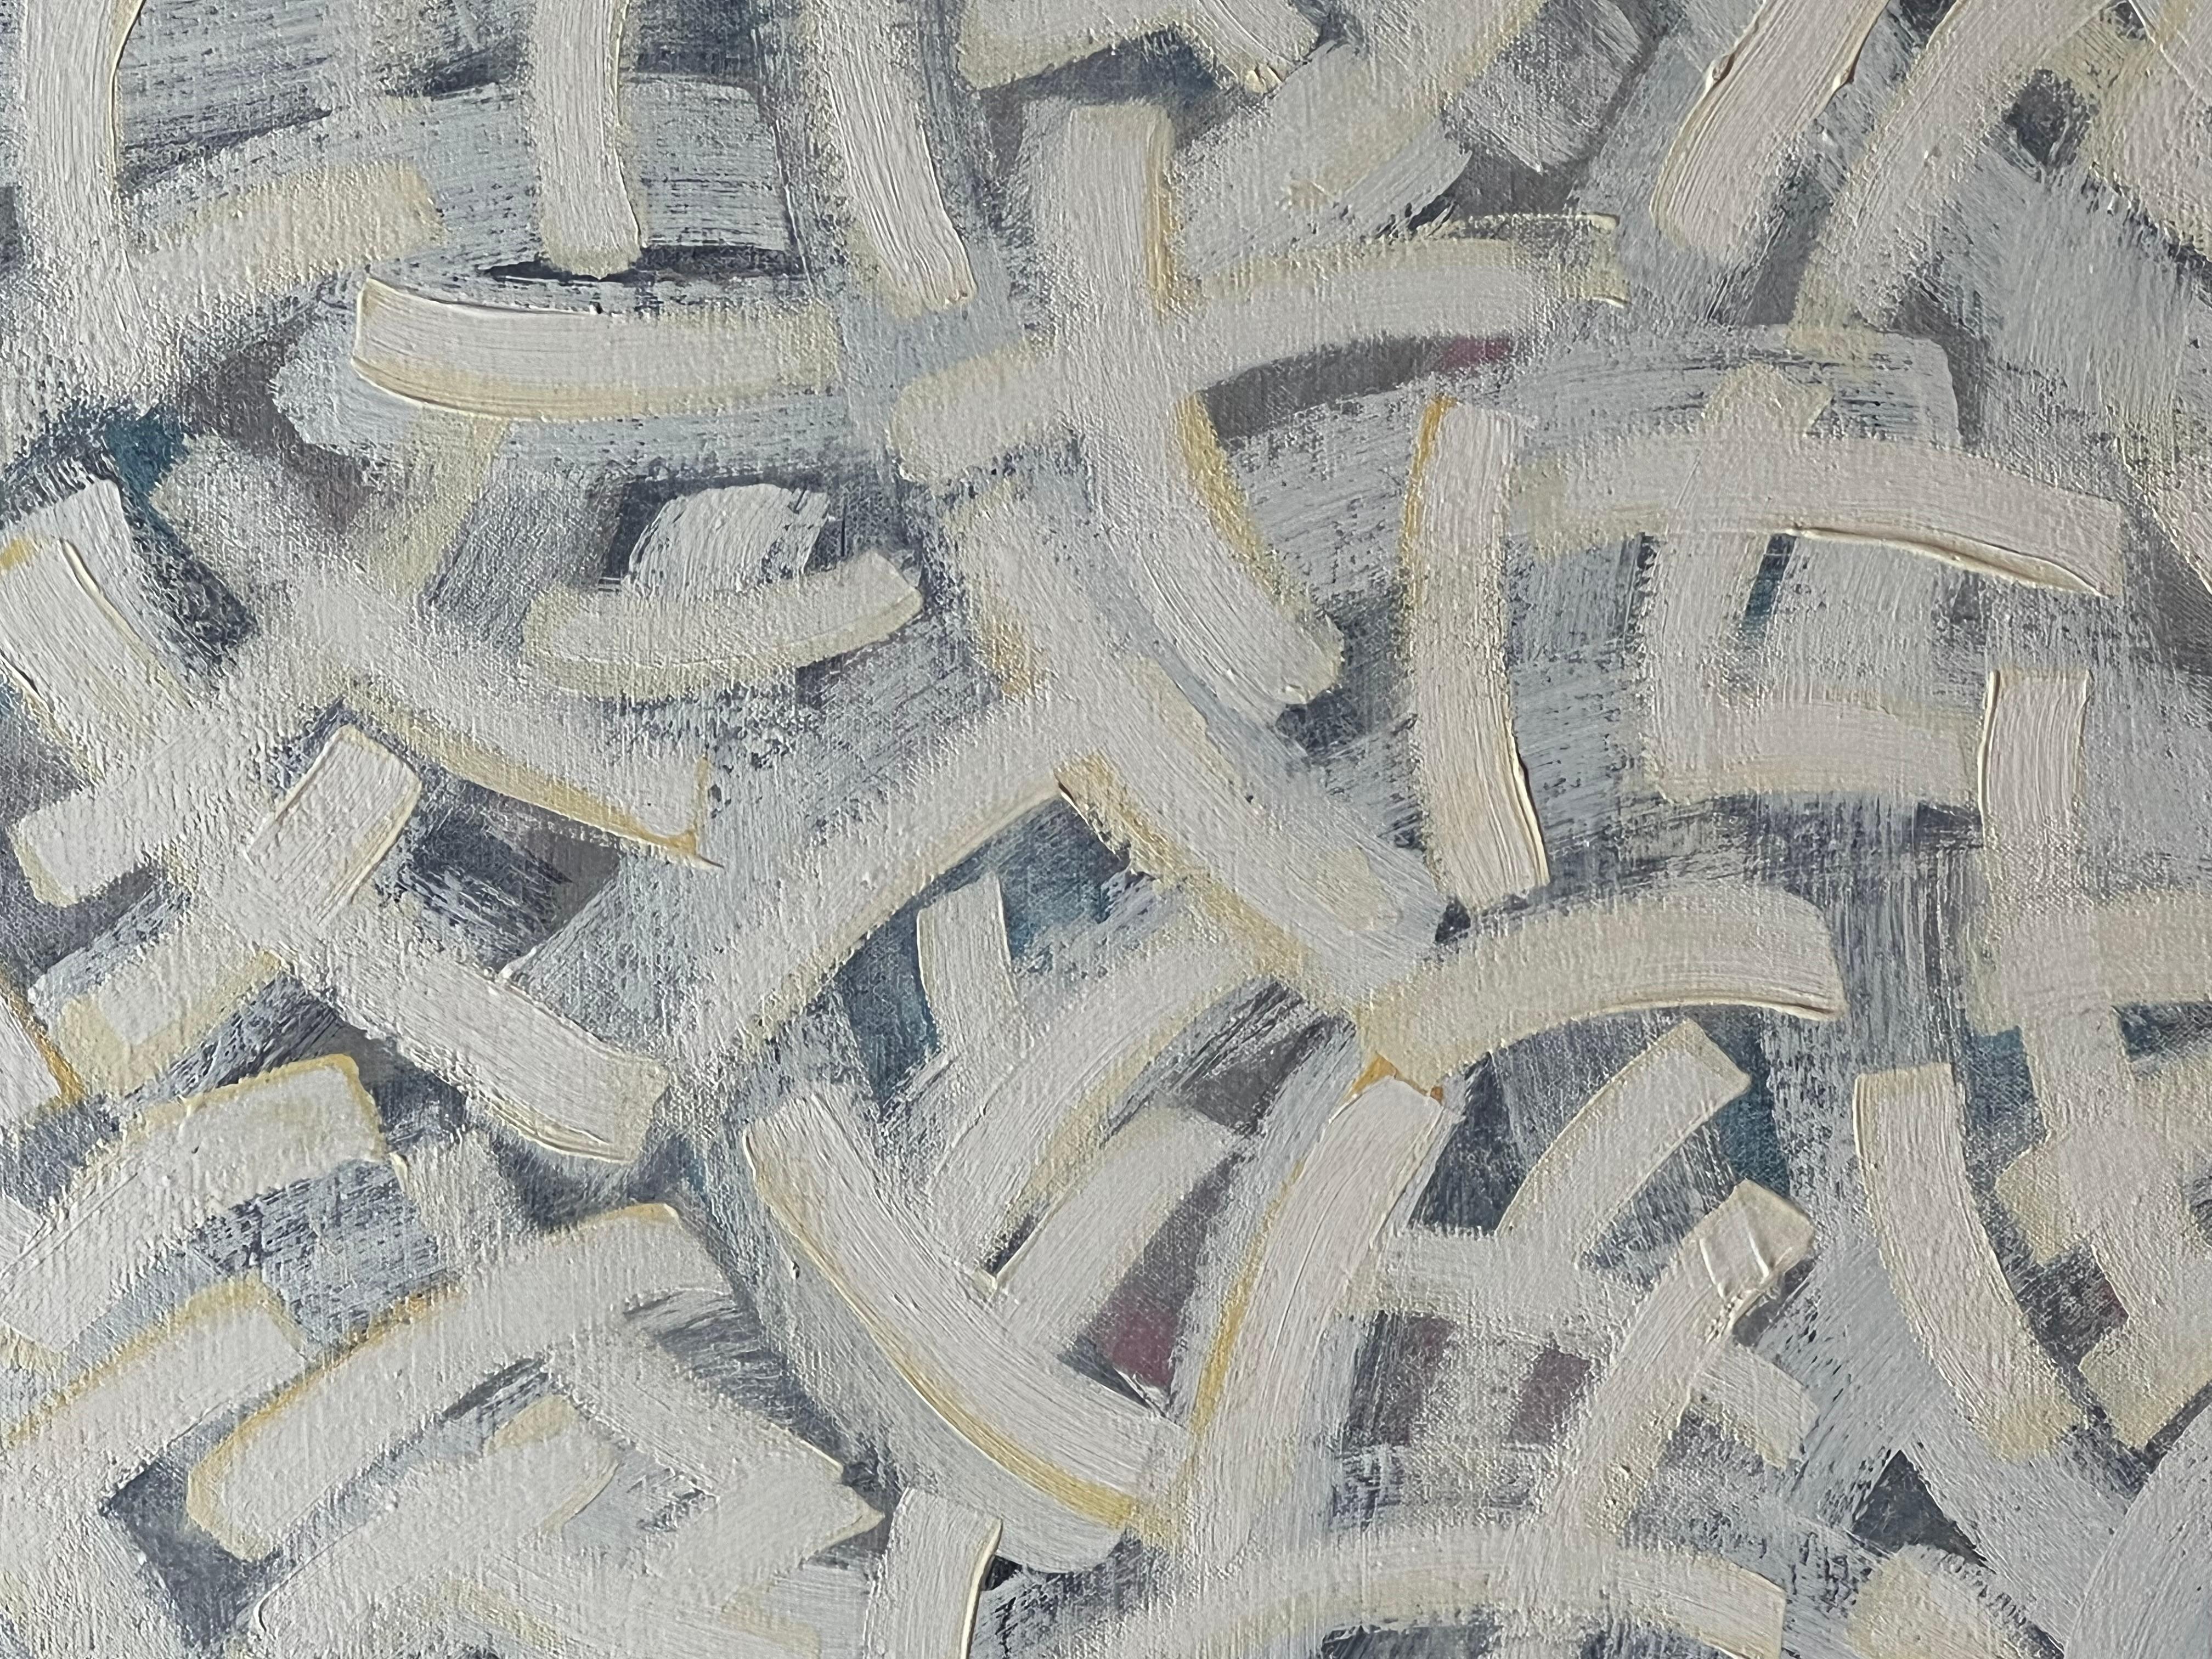 This abstract acrylic painting on canvas intertwines layers of white curved lines on a grey-blue background. The overall impression is a gently flowing serenity thanks to an astute pattern repetition.

 Richard M. Proctor was born in Detroit,